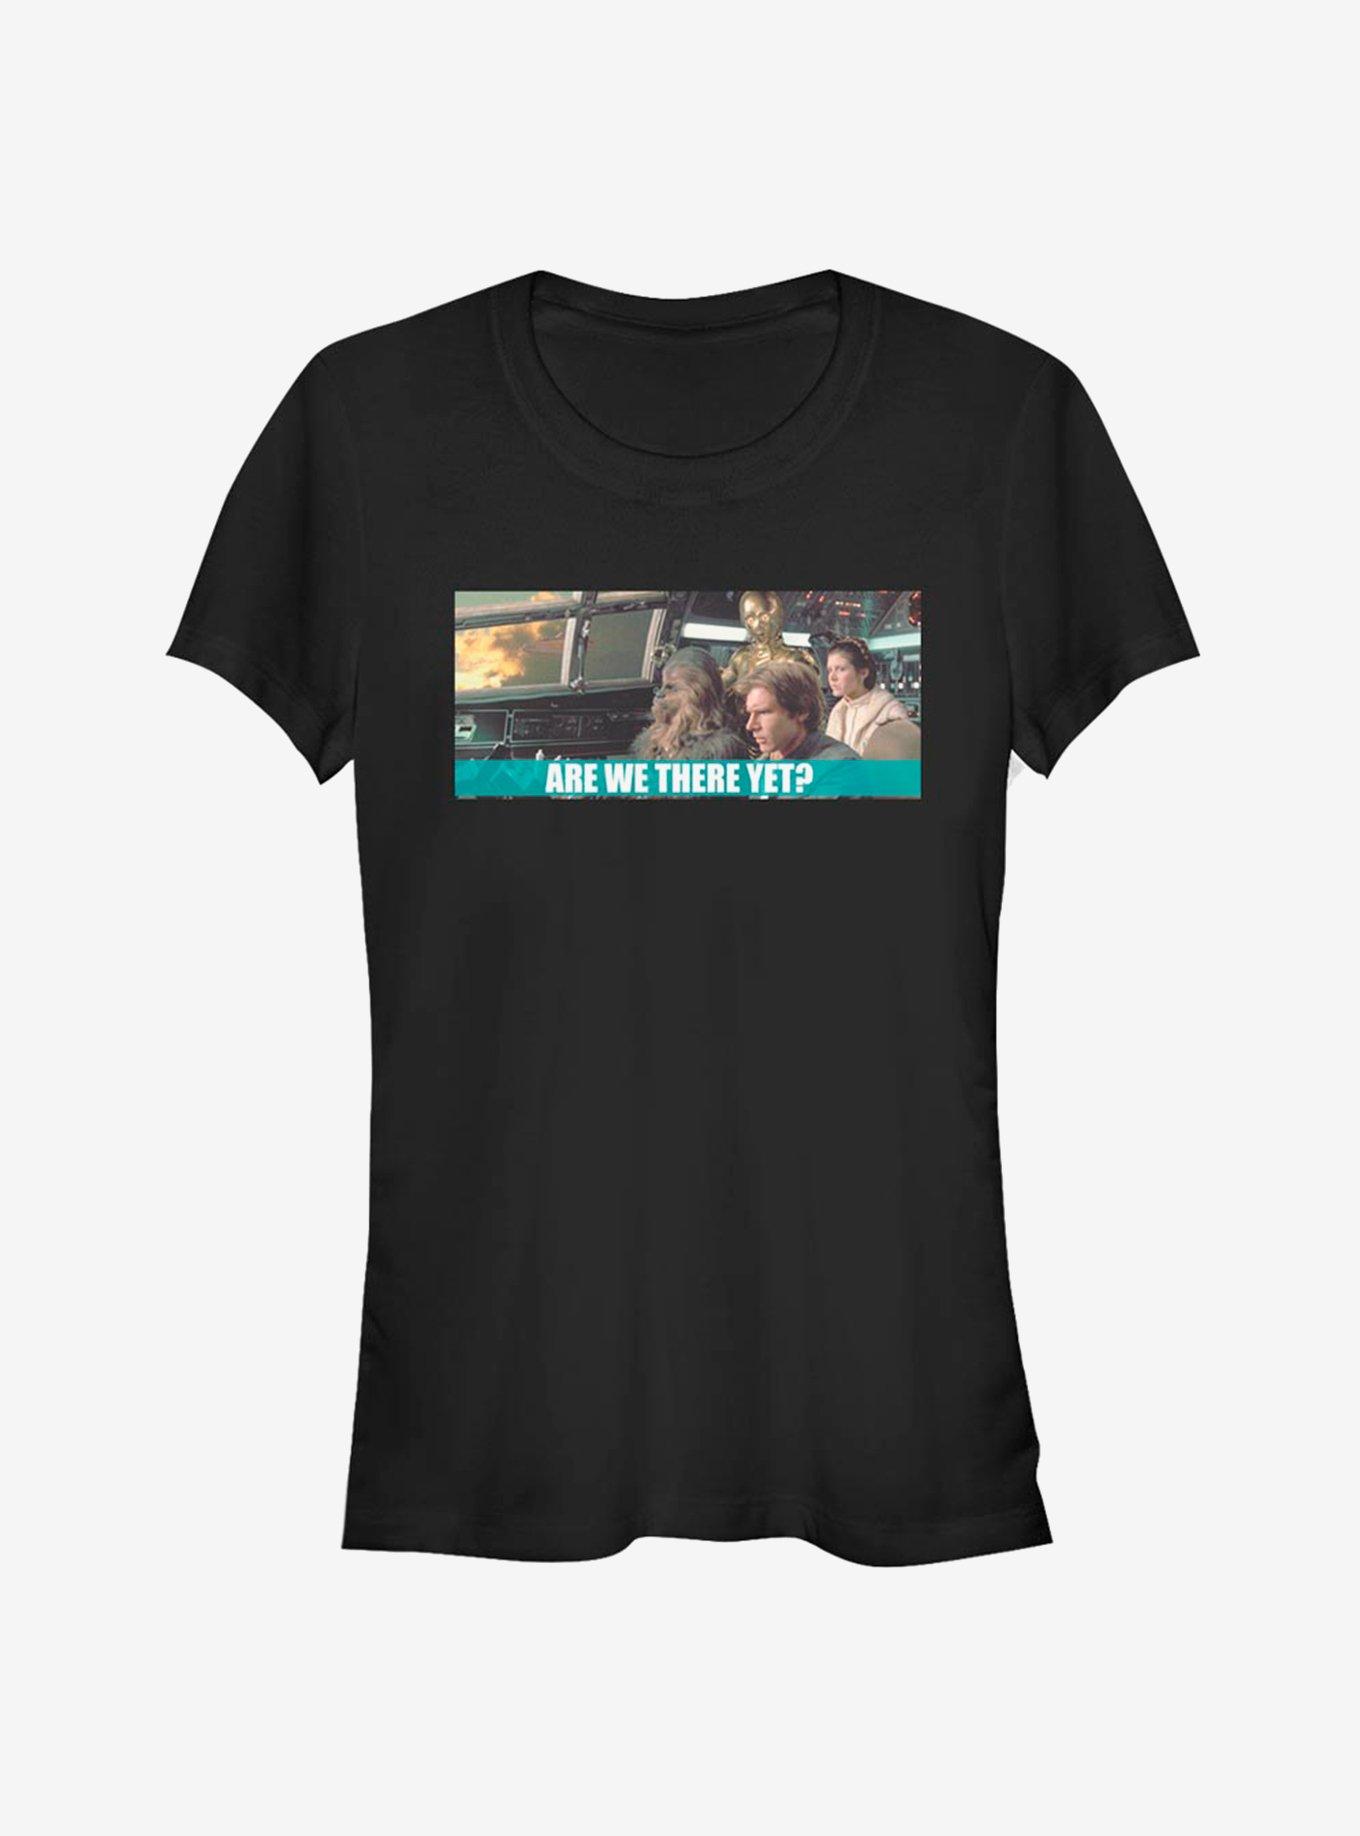 Star Wars Are We There Yet? Girls T-Shirt, BLACK, hi-res